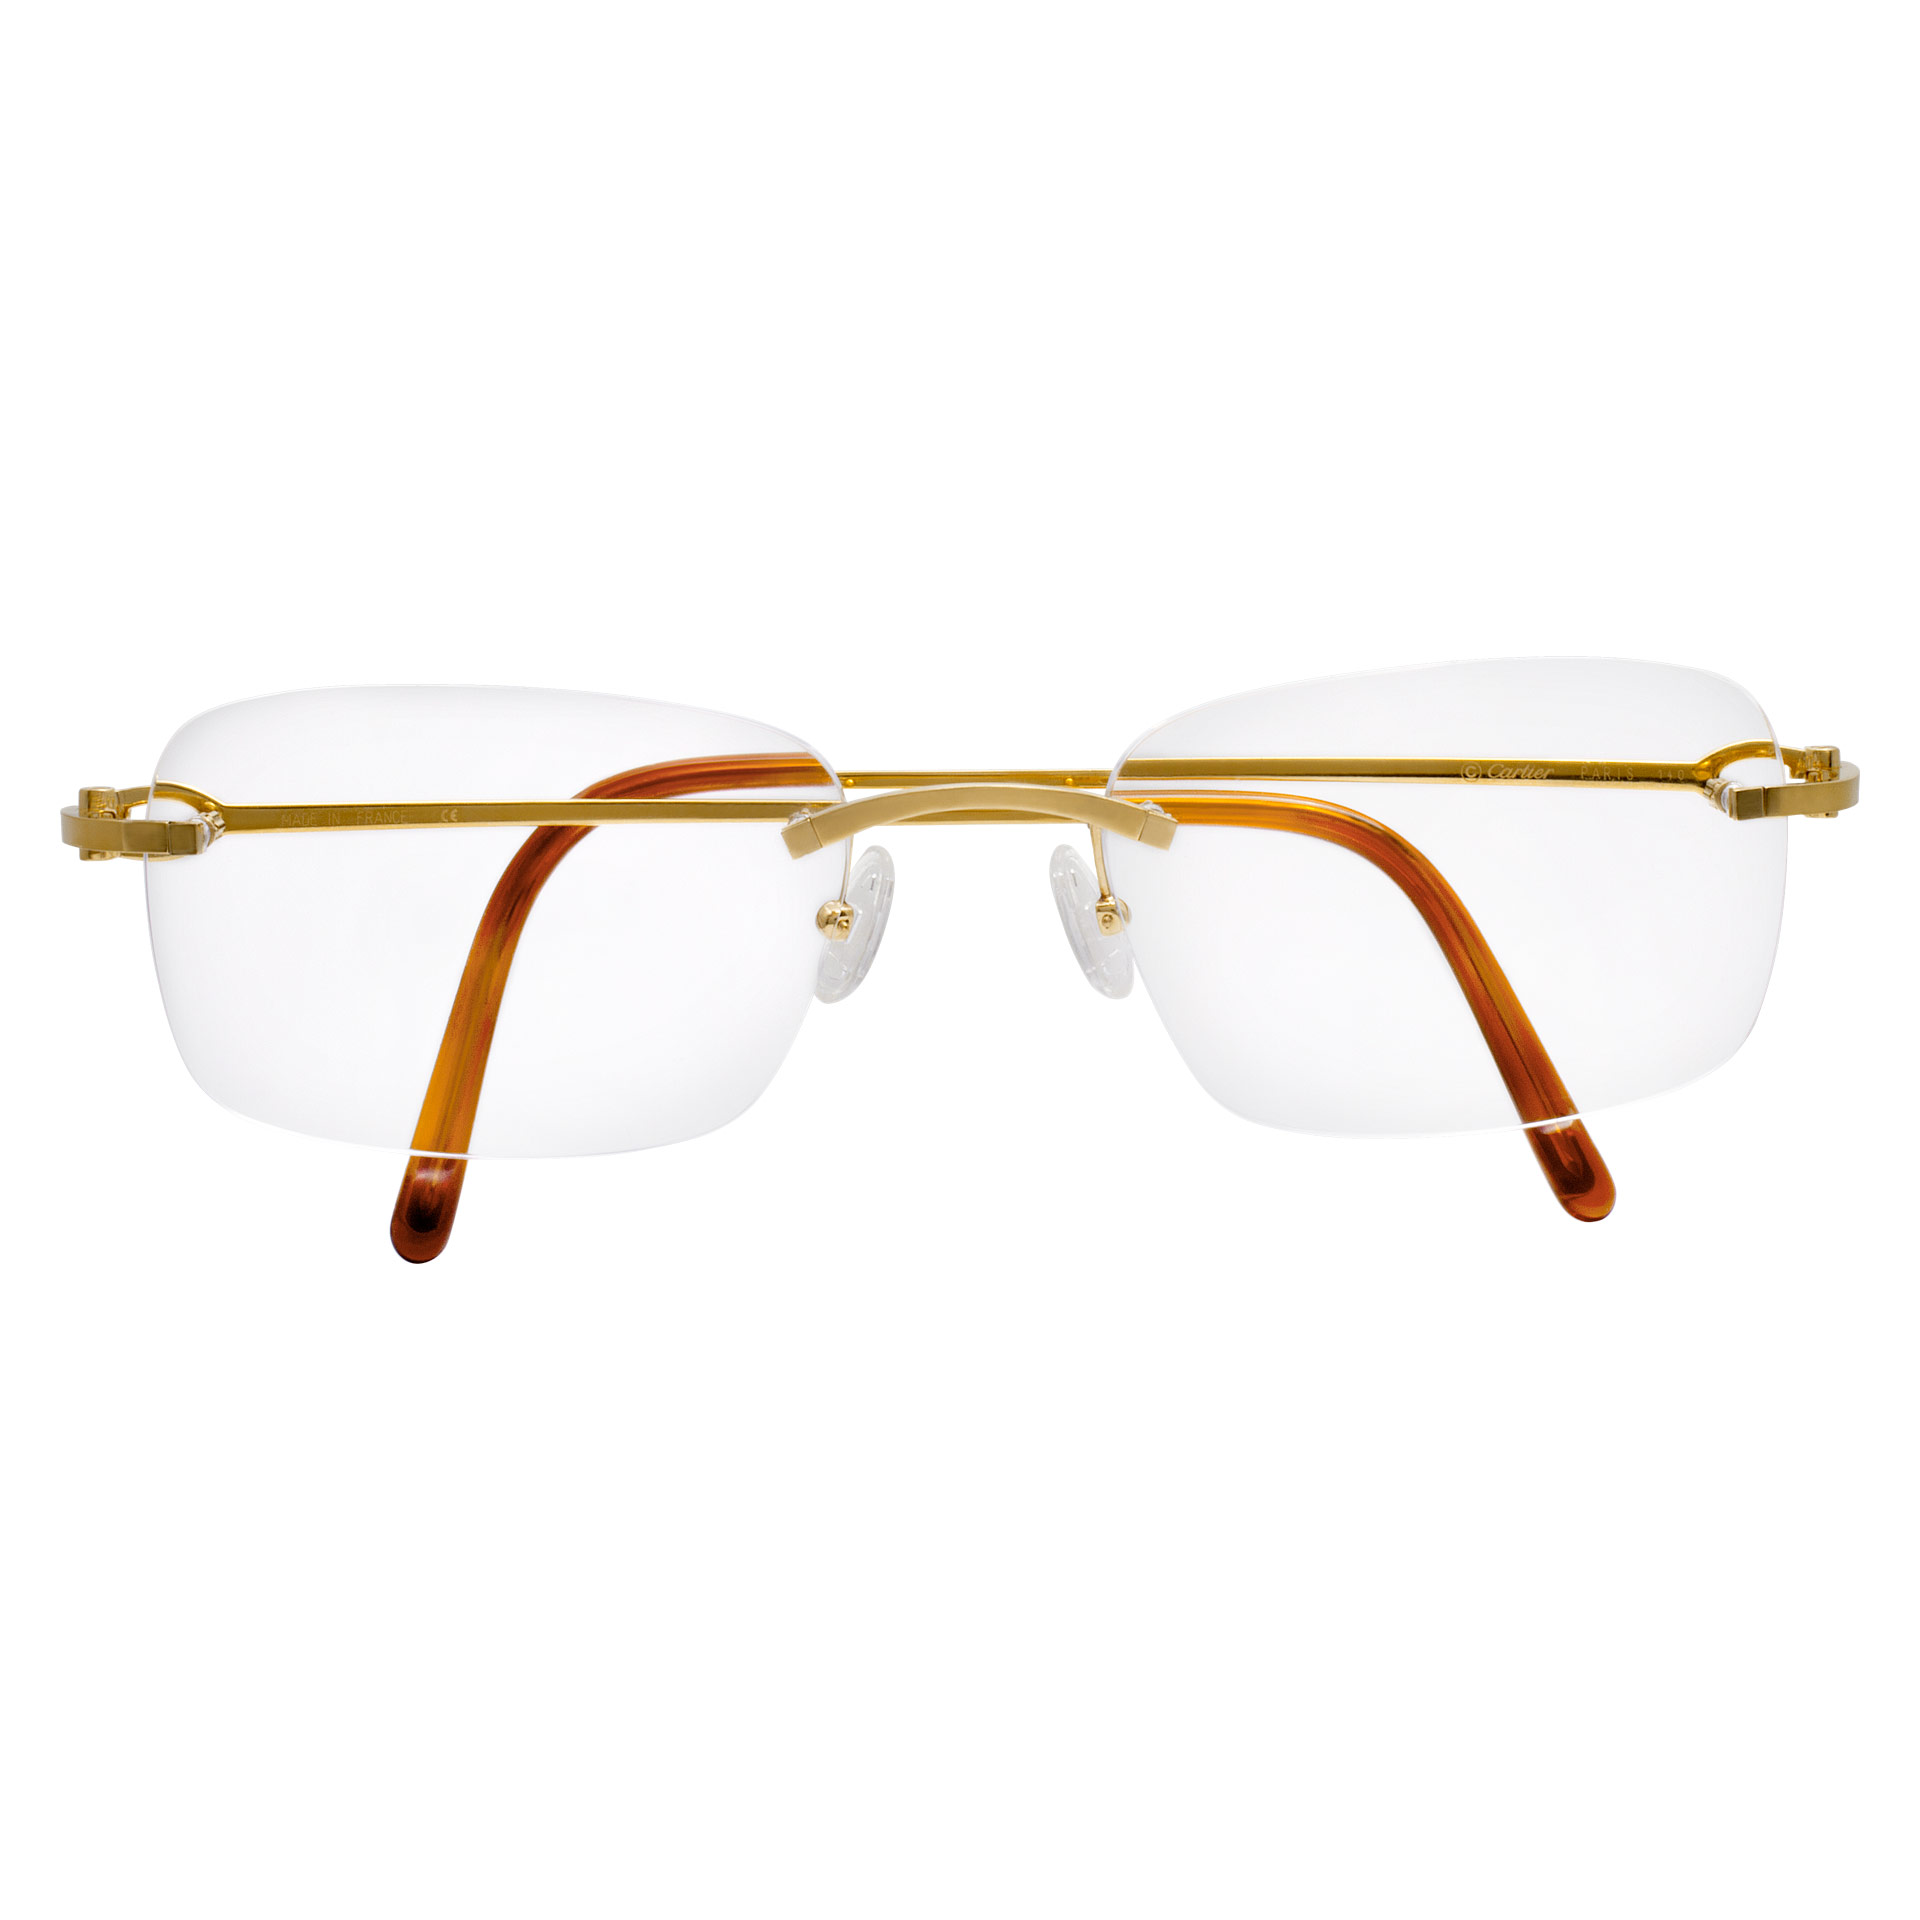 Cartier glasses in 18k gold plated frame. image 1